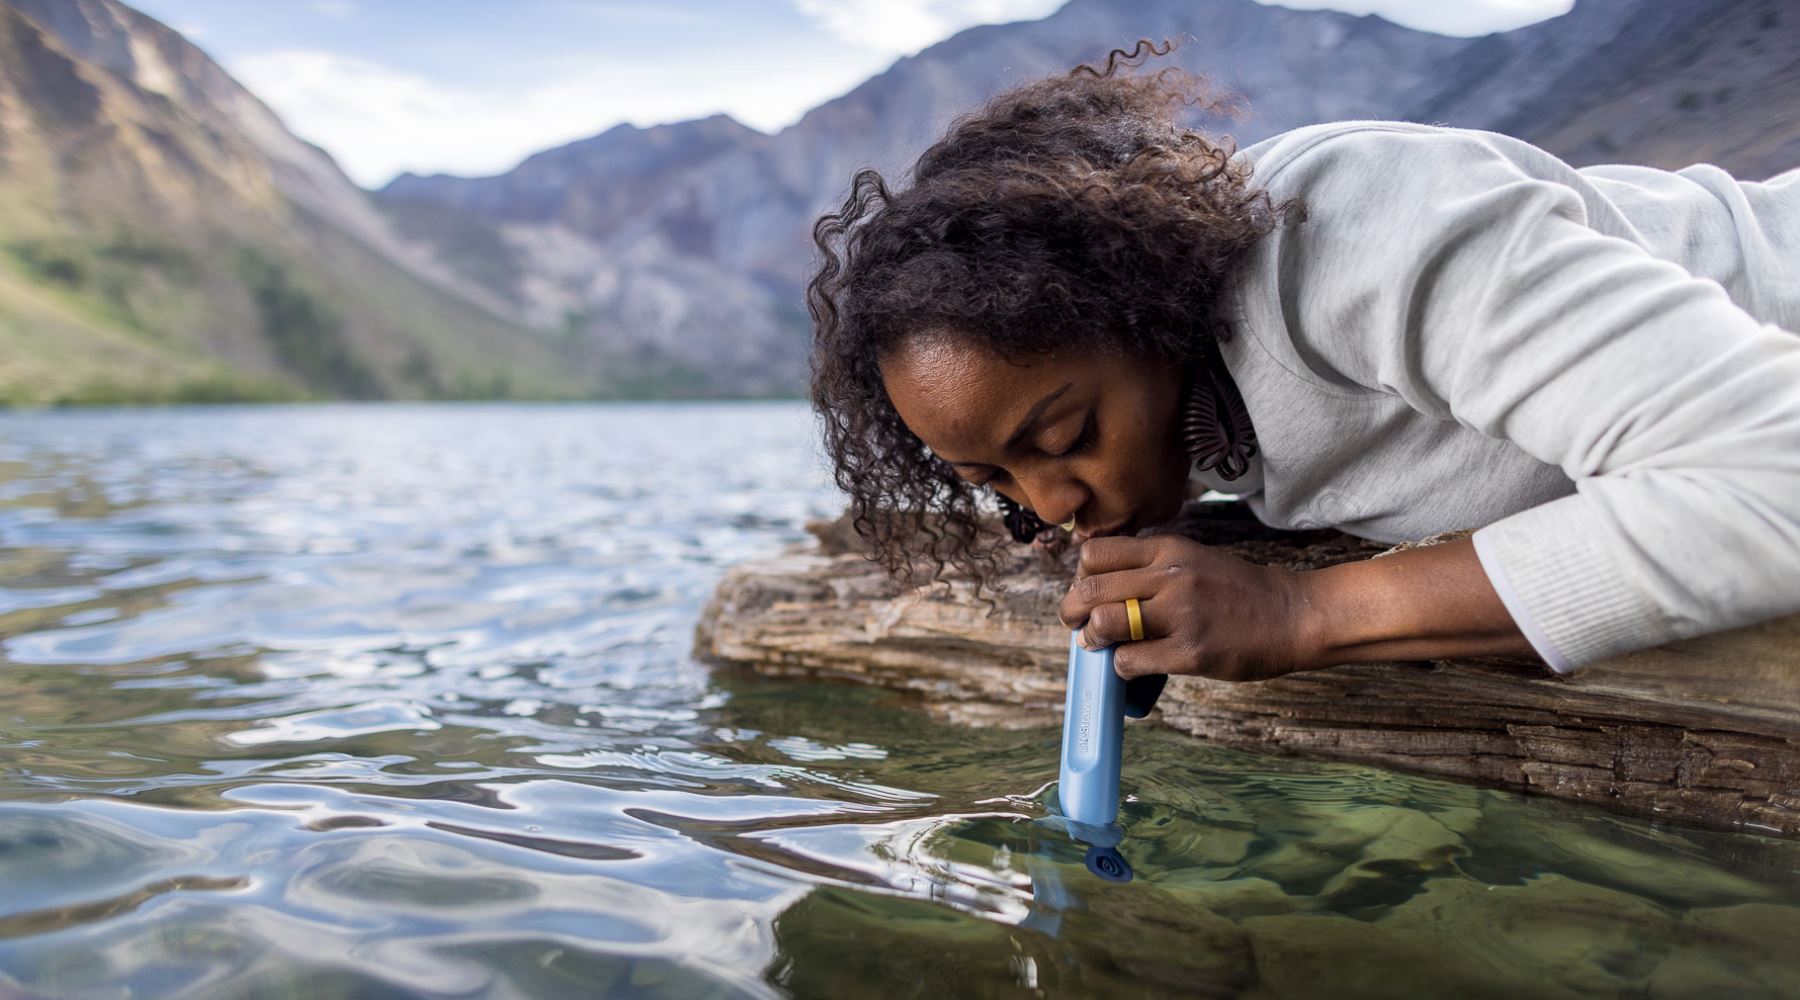 The LifeStraw Peak Solo is a tiny water filter for camping and emergencies